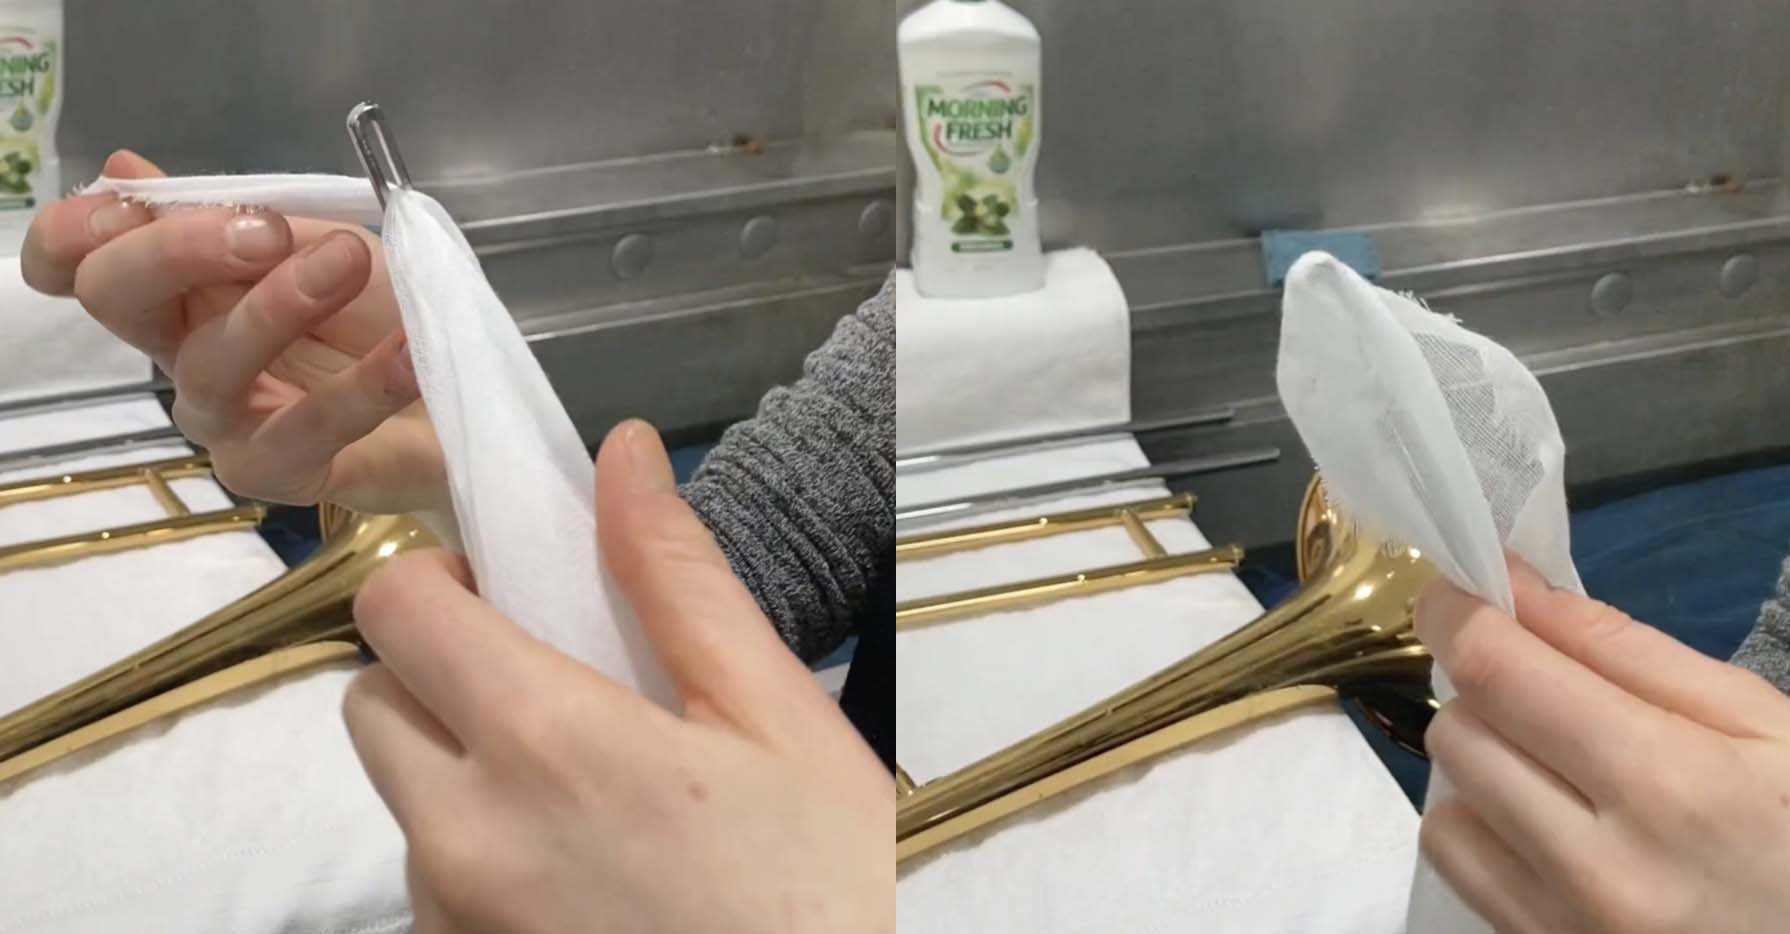 Two images side by side. On the left, a thin, white cloth is being pulled through the top of the trombone cleaning rod. On the right, the cloth is being wrapped around the rod.